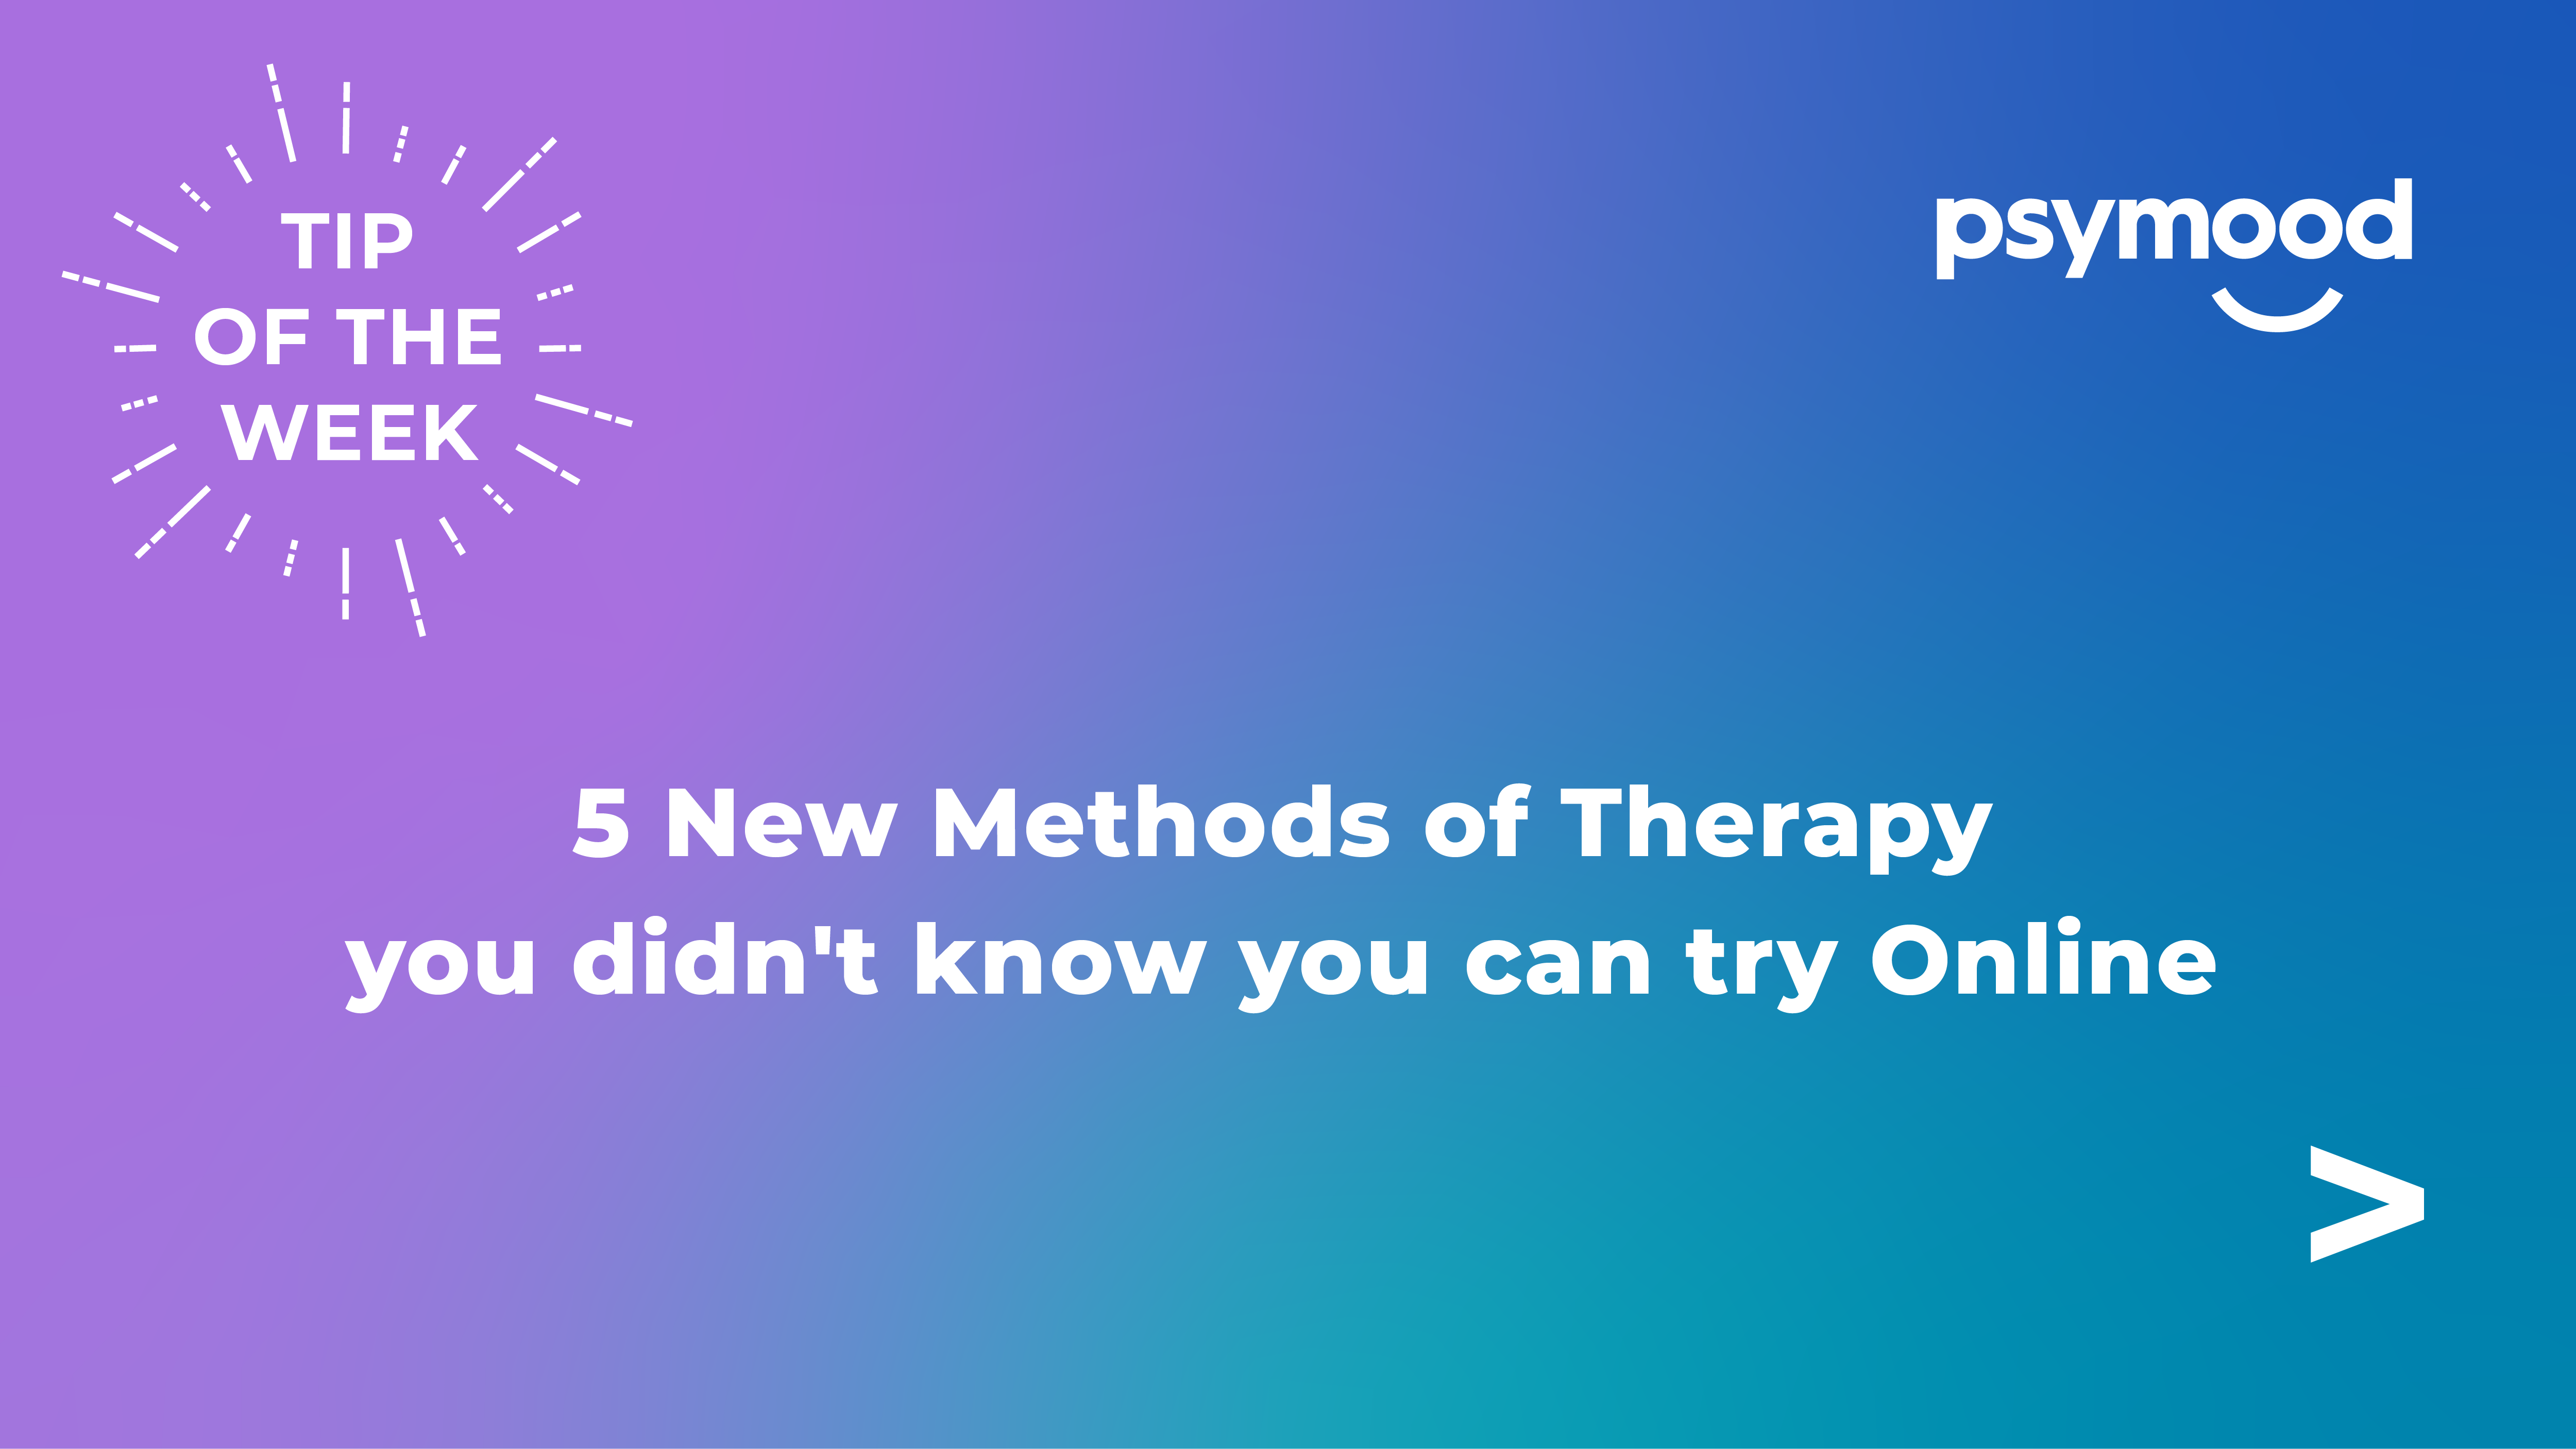 5 New Methods of Therapy you didn’t know you can try Online